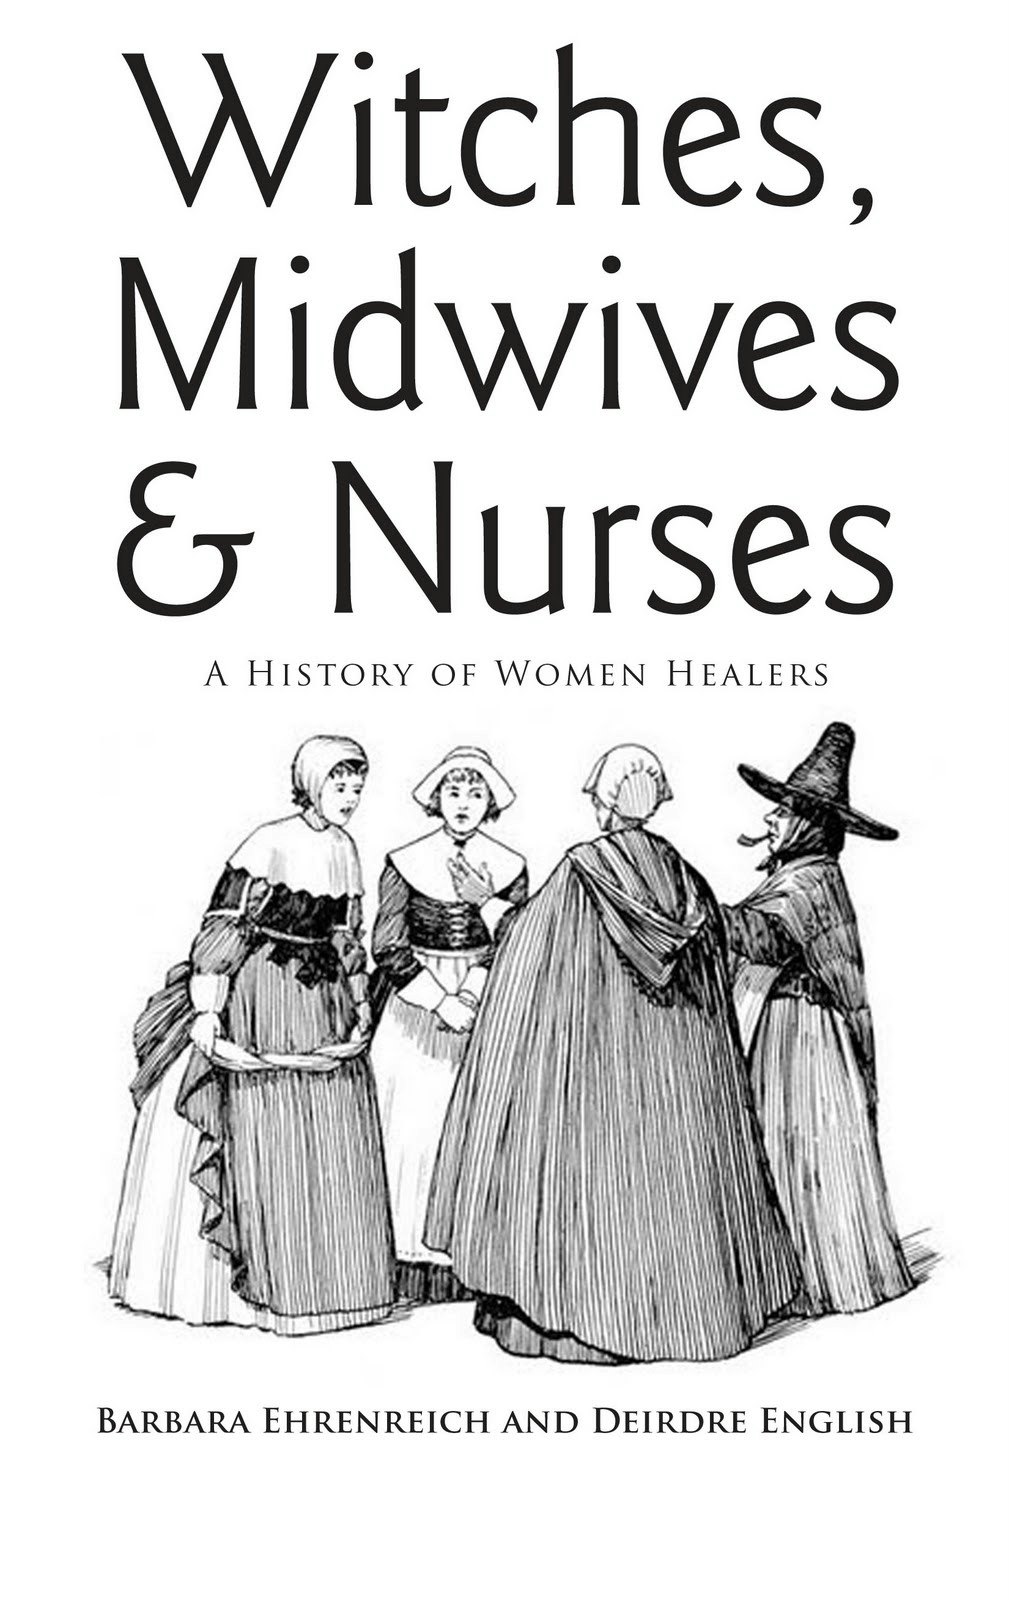 Witches, Midwives and Nurses by Barbara Ehrenreich